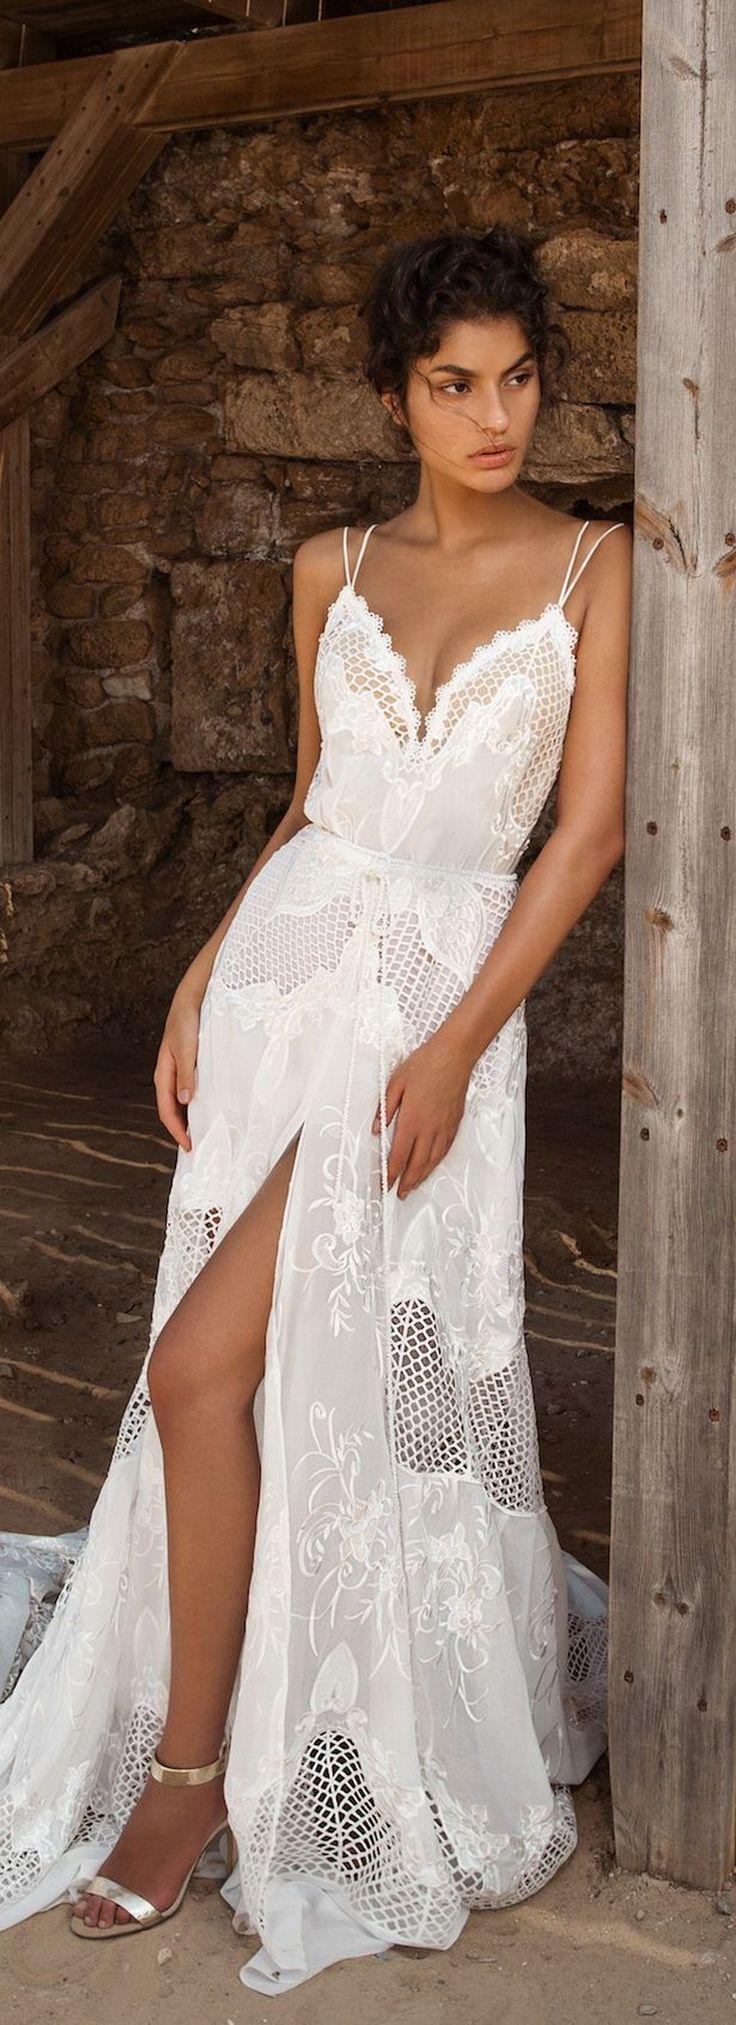 Wedding - 52 Best Charming Wedding Dress For Outdoor Party